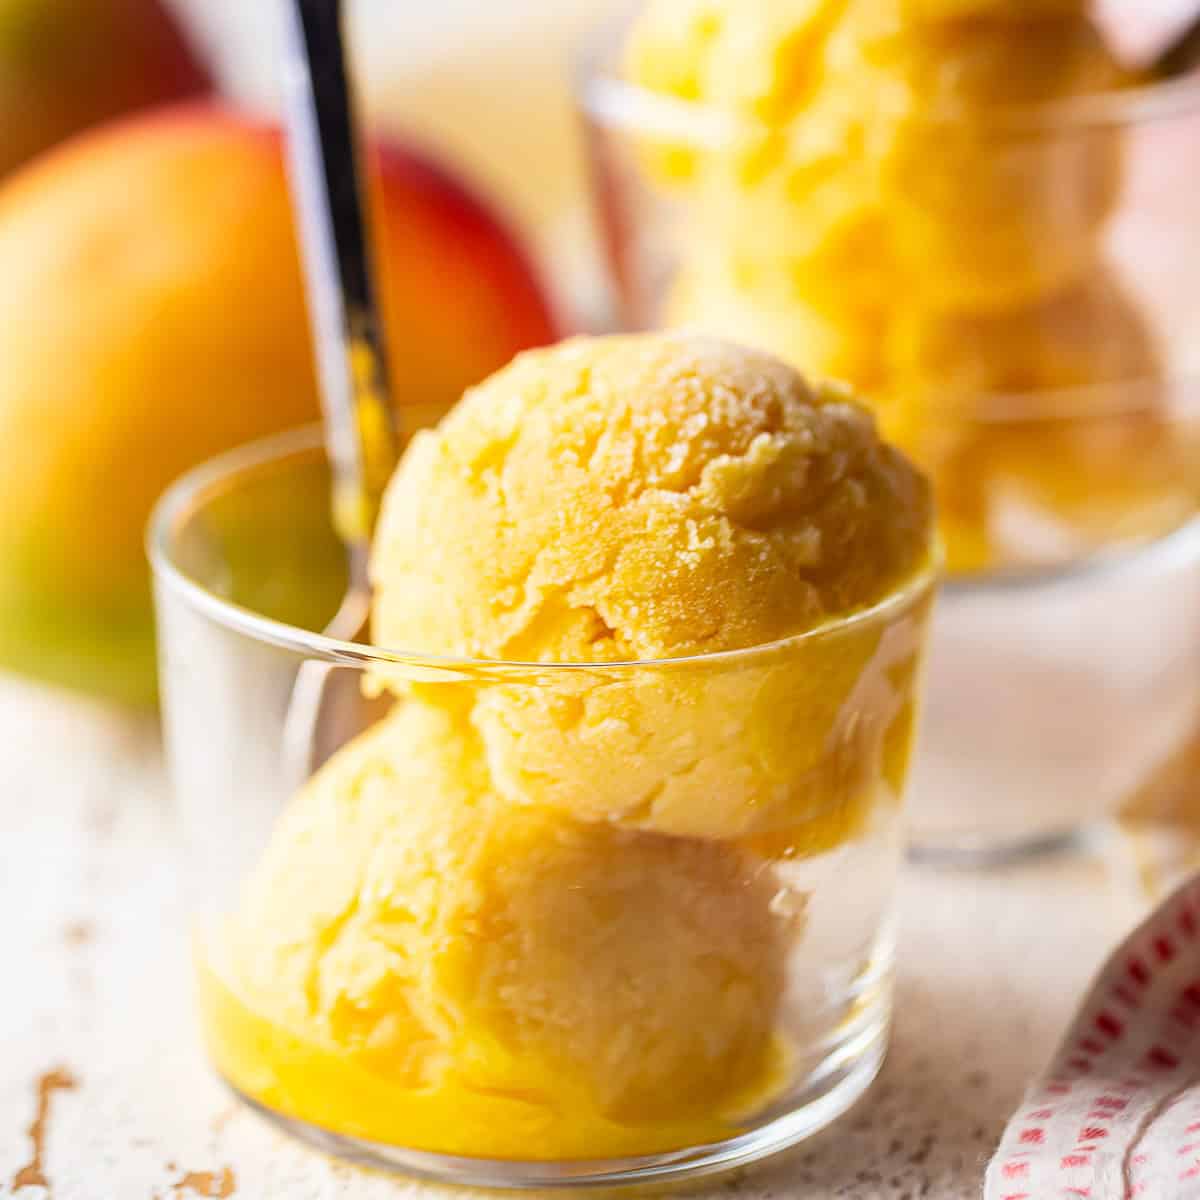 Two scoops of mango sorbet in a small glass dish with a spoon.